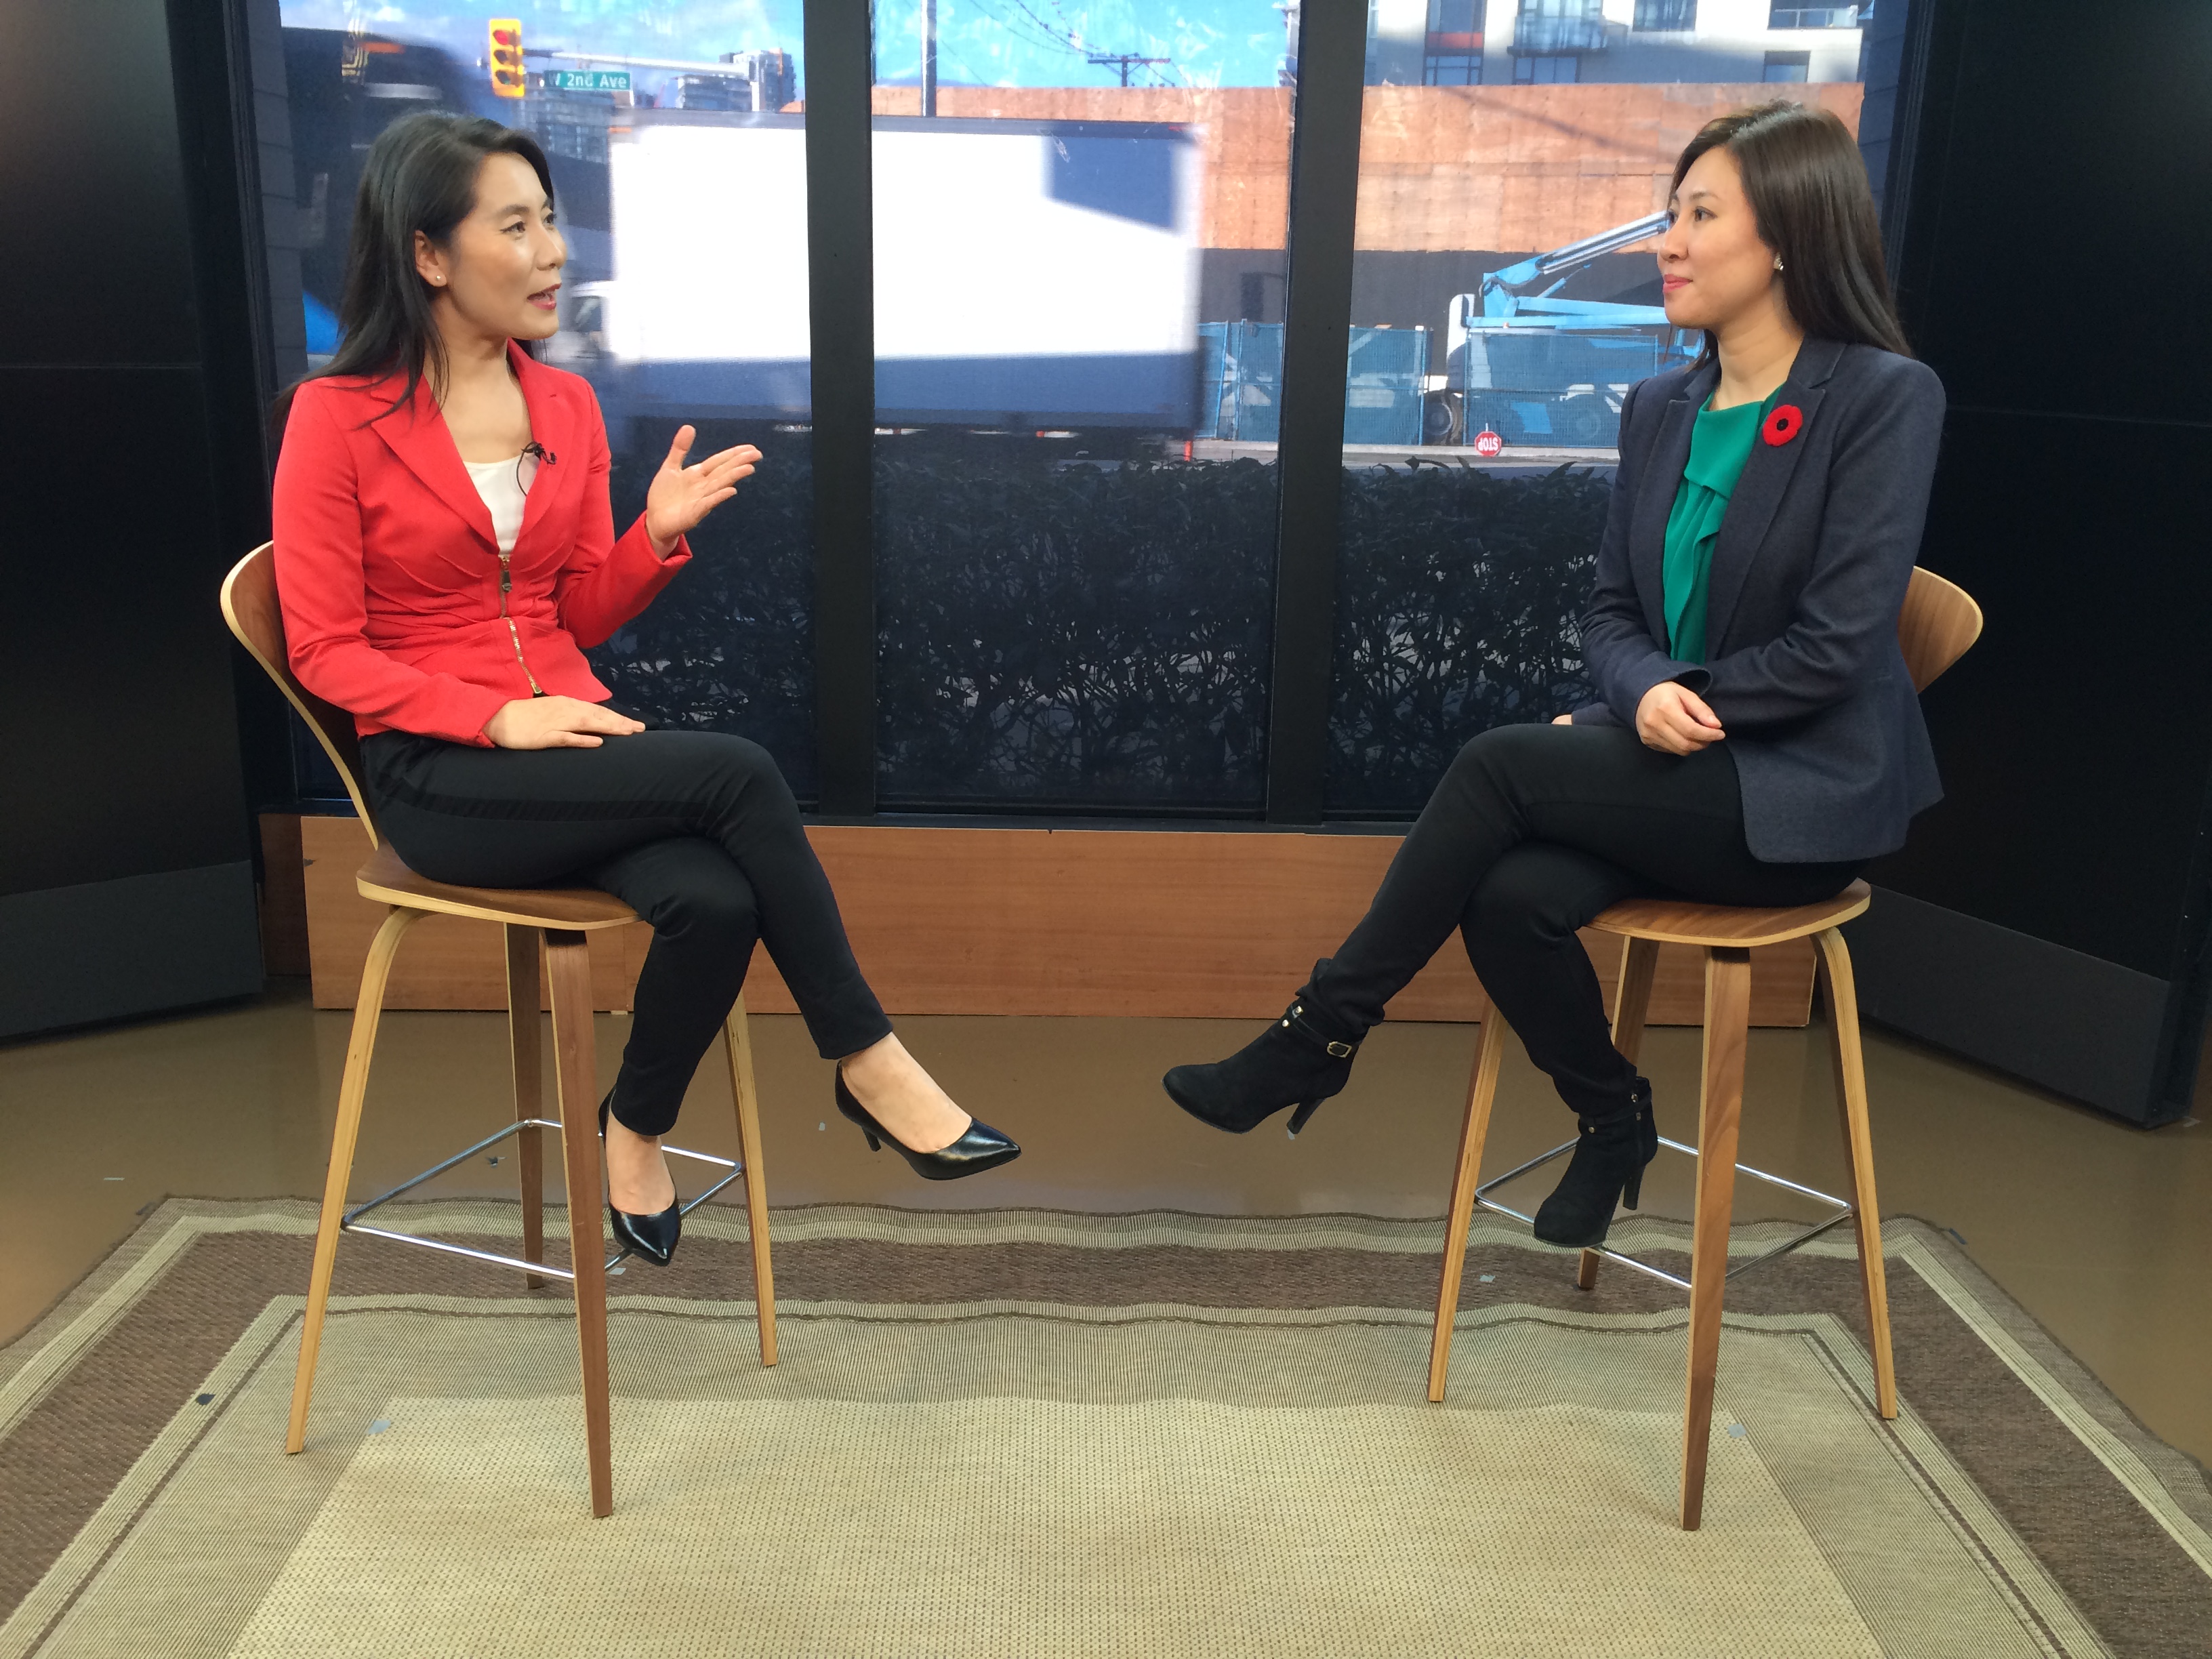 Fiona Fu was interviewed by OMNI TV host Tina Song(2015)